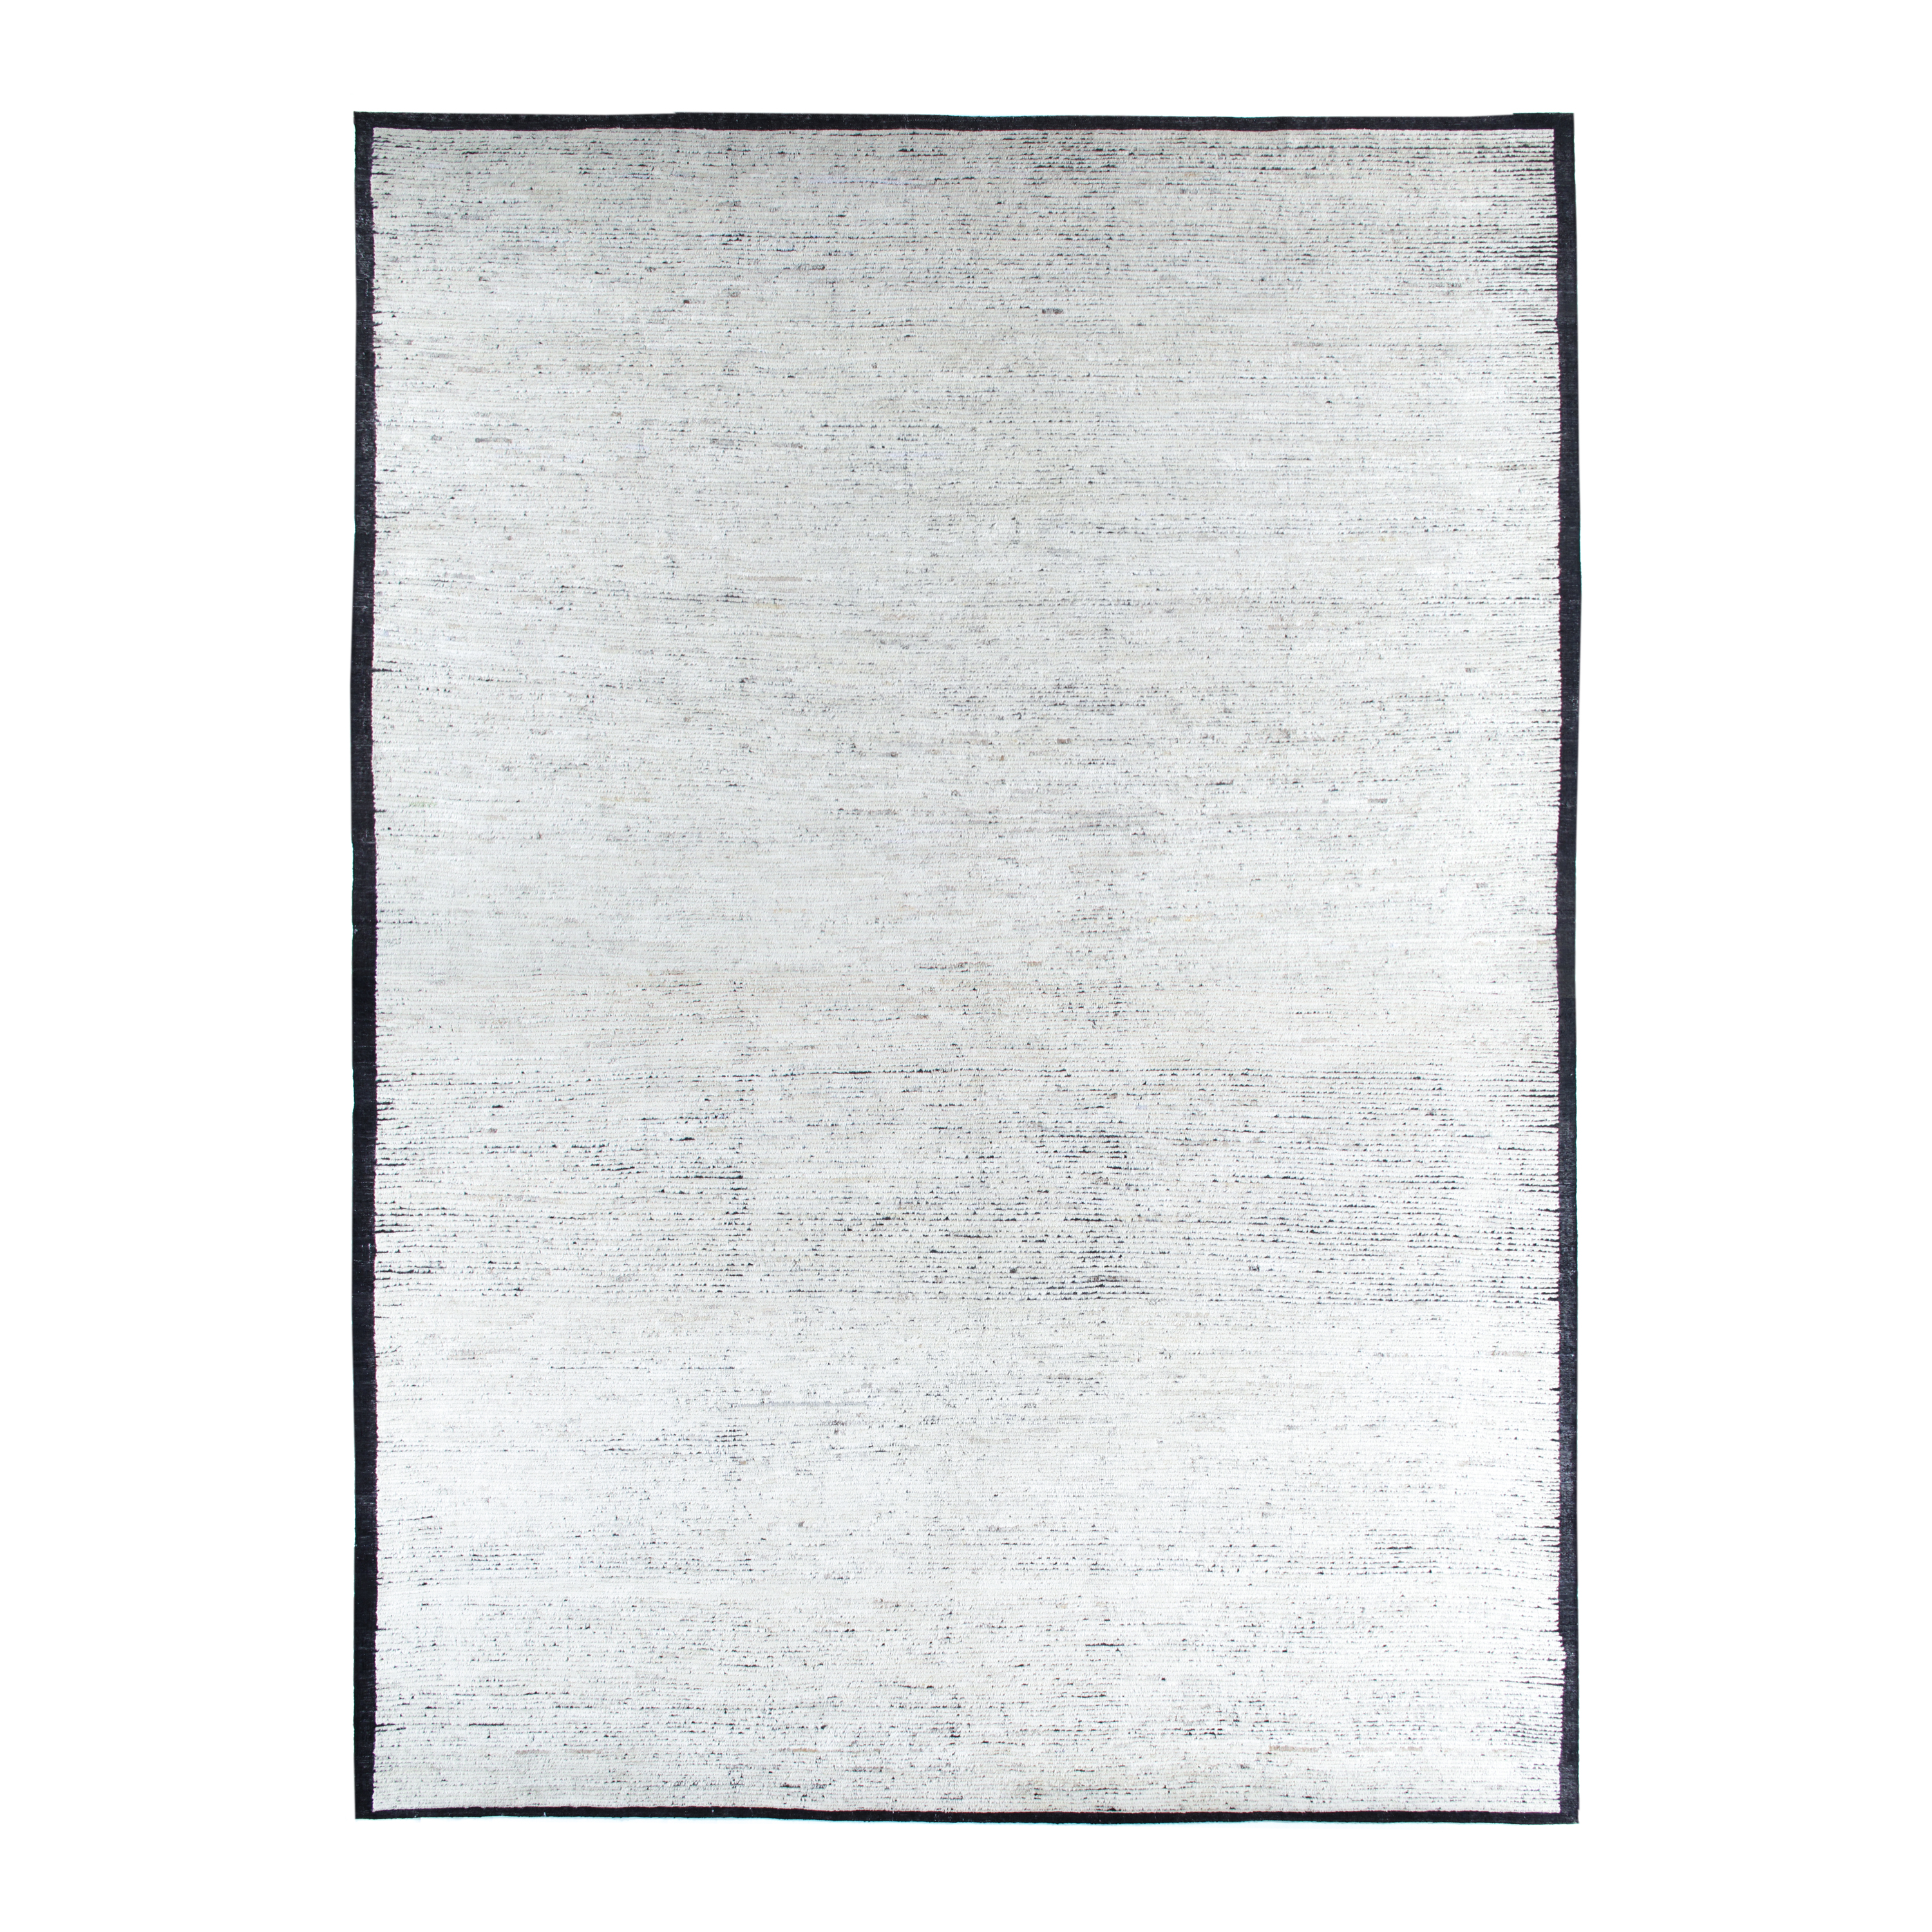 African rug is hand-knotted from naturally dyed wool with subtle silk accents. 